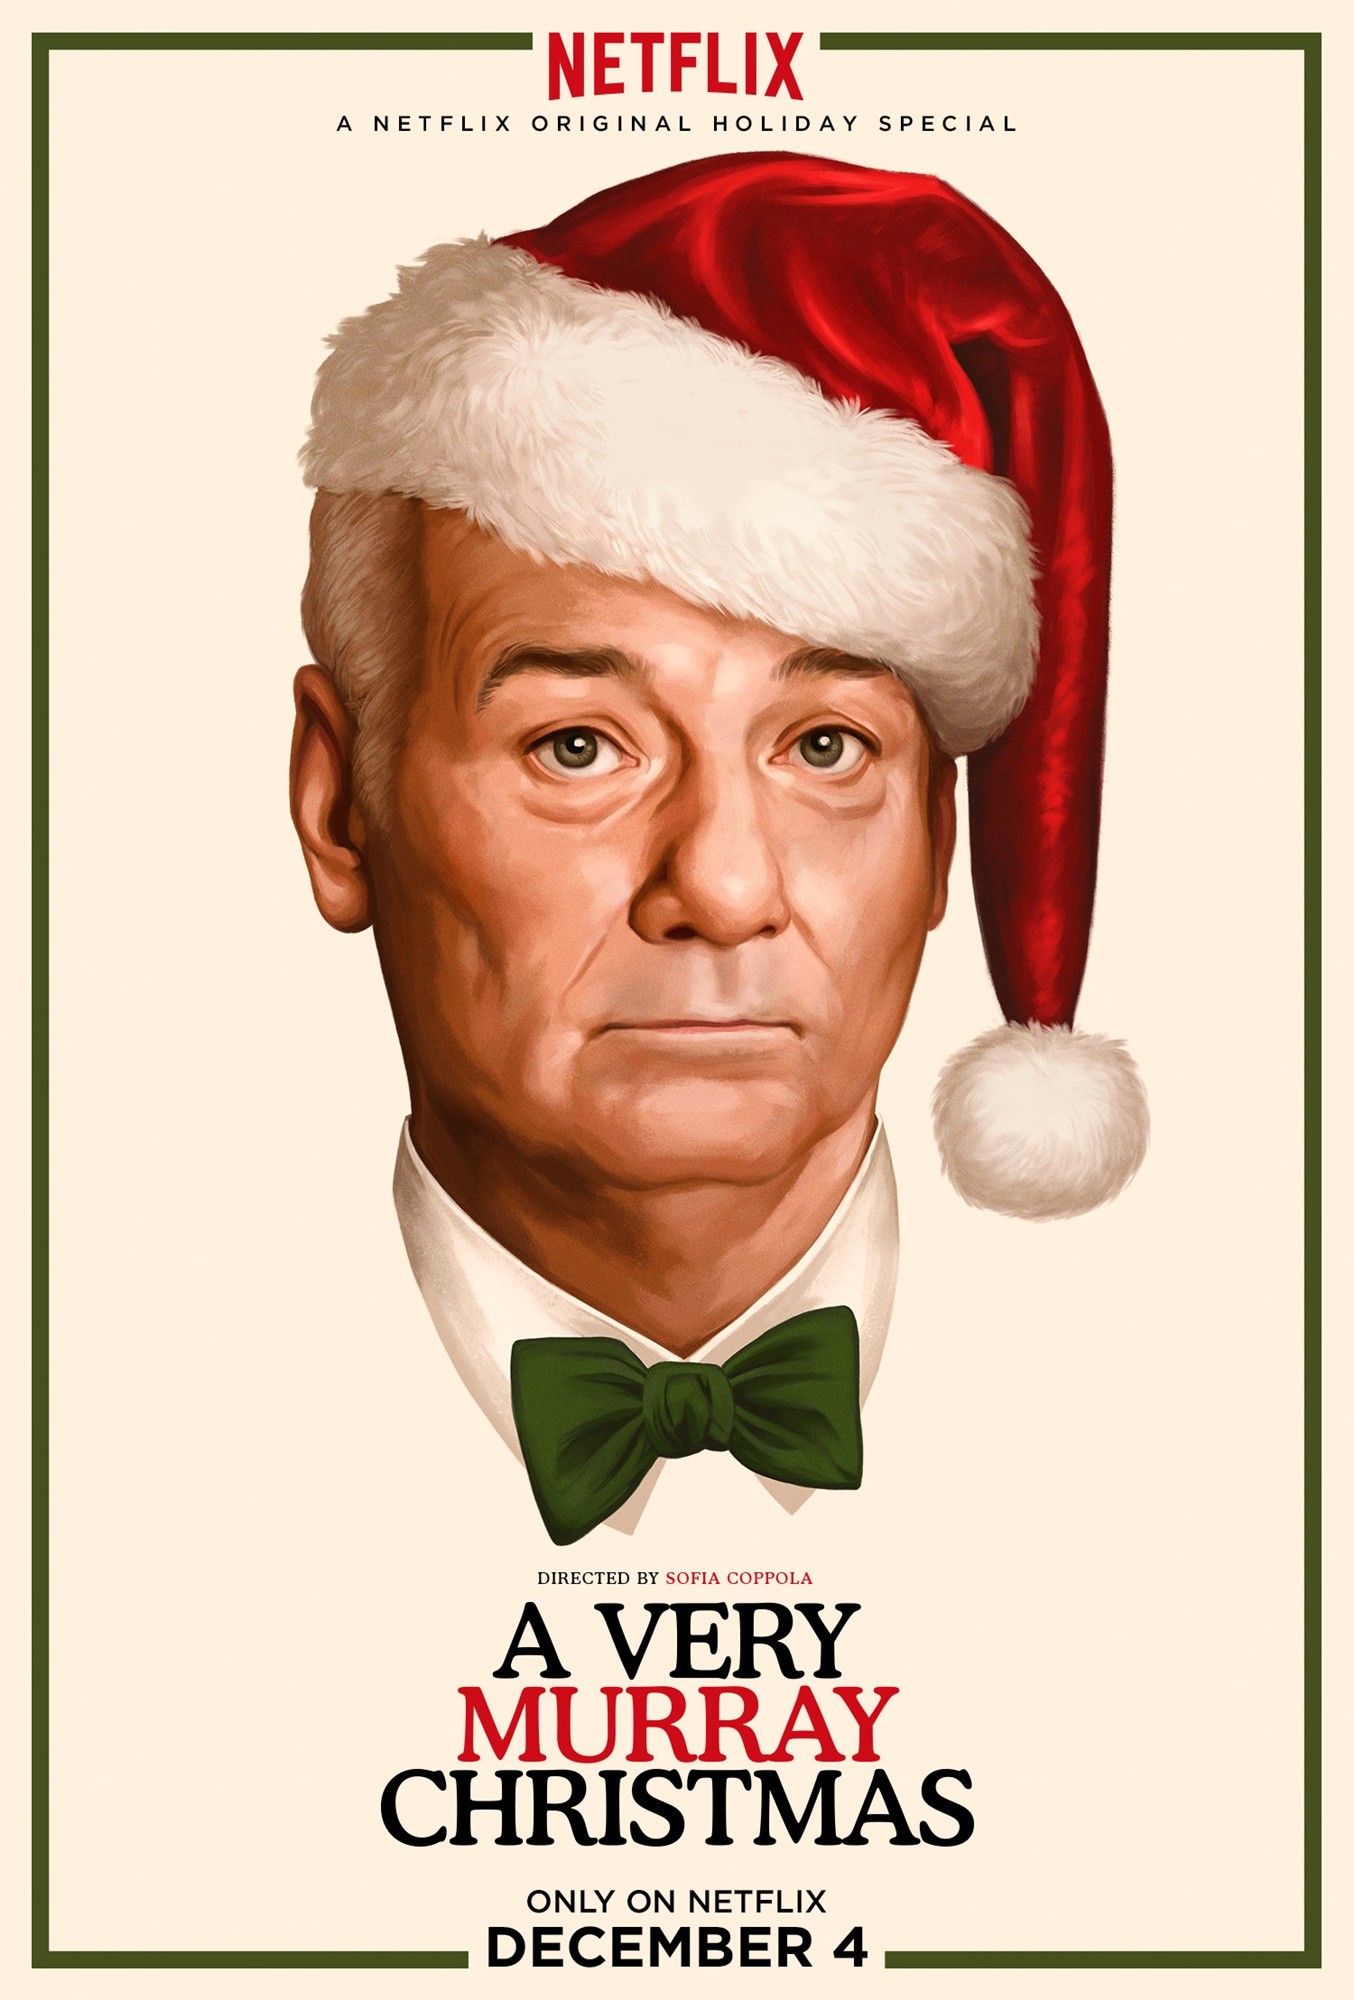 Poster of Netflix's A Very Murray Christmas (2015)